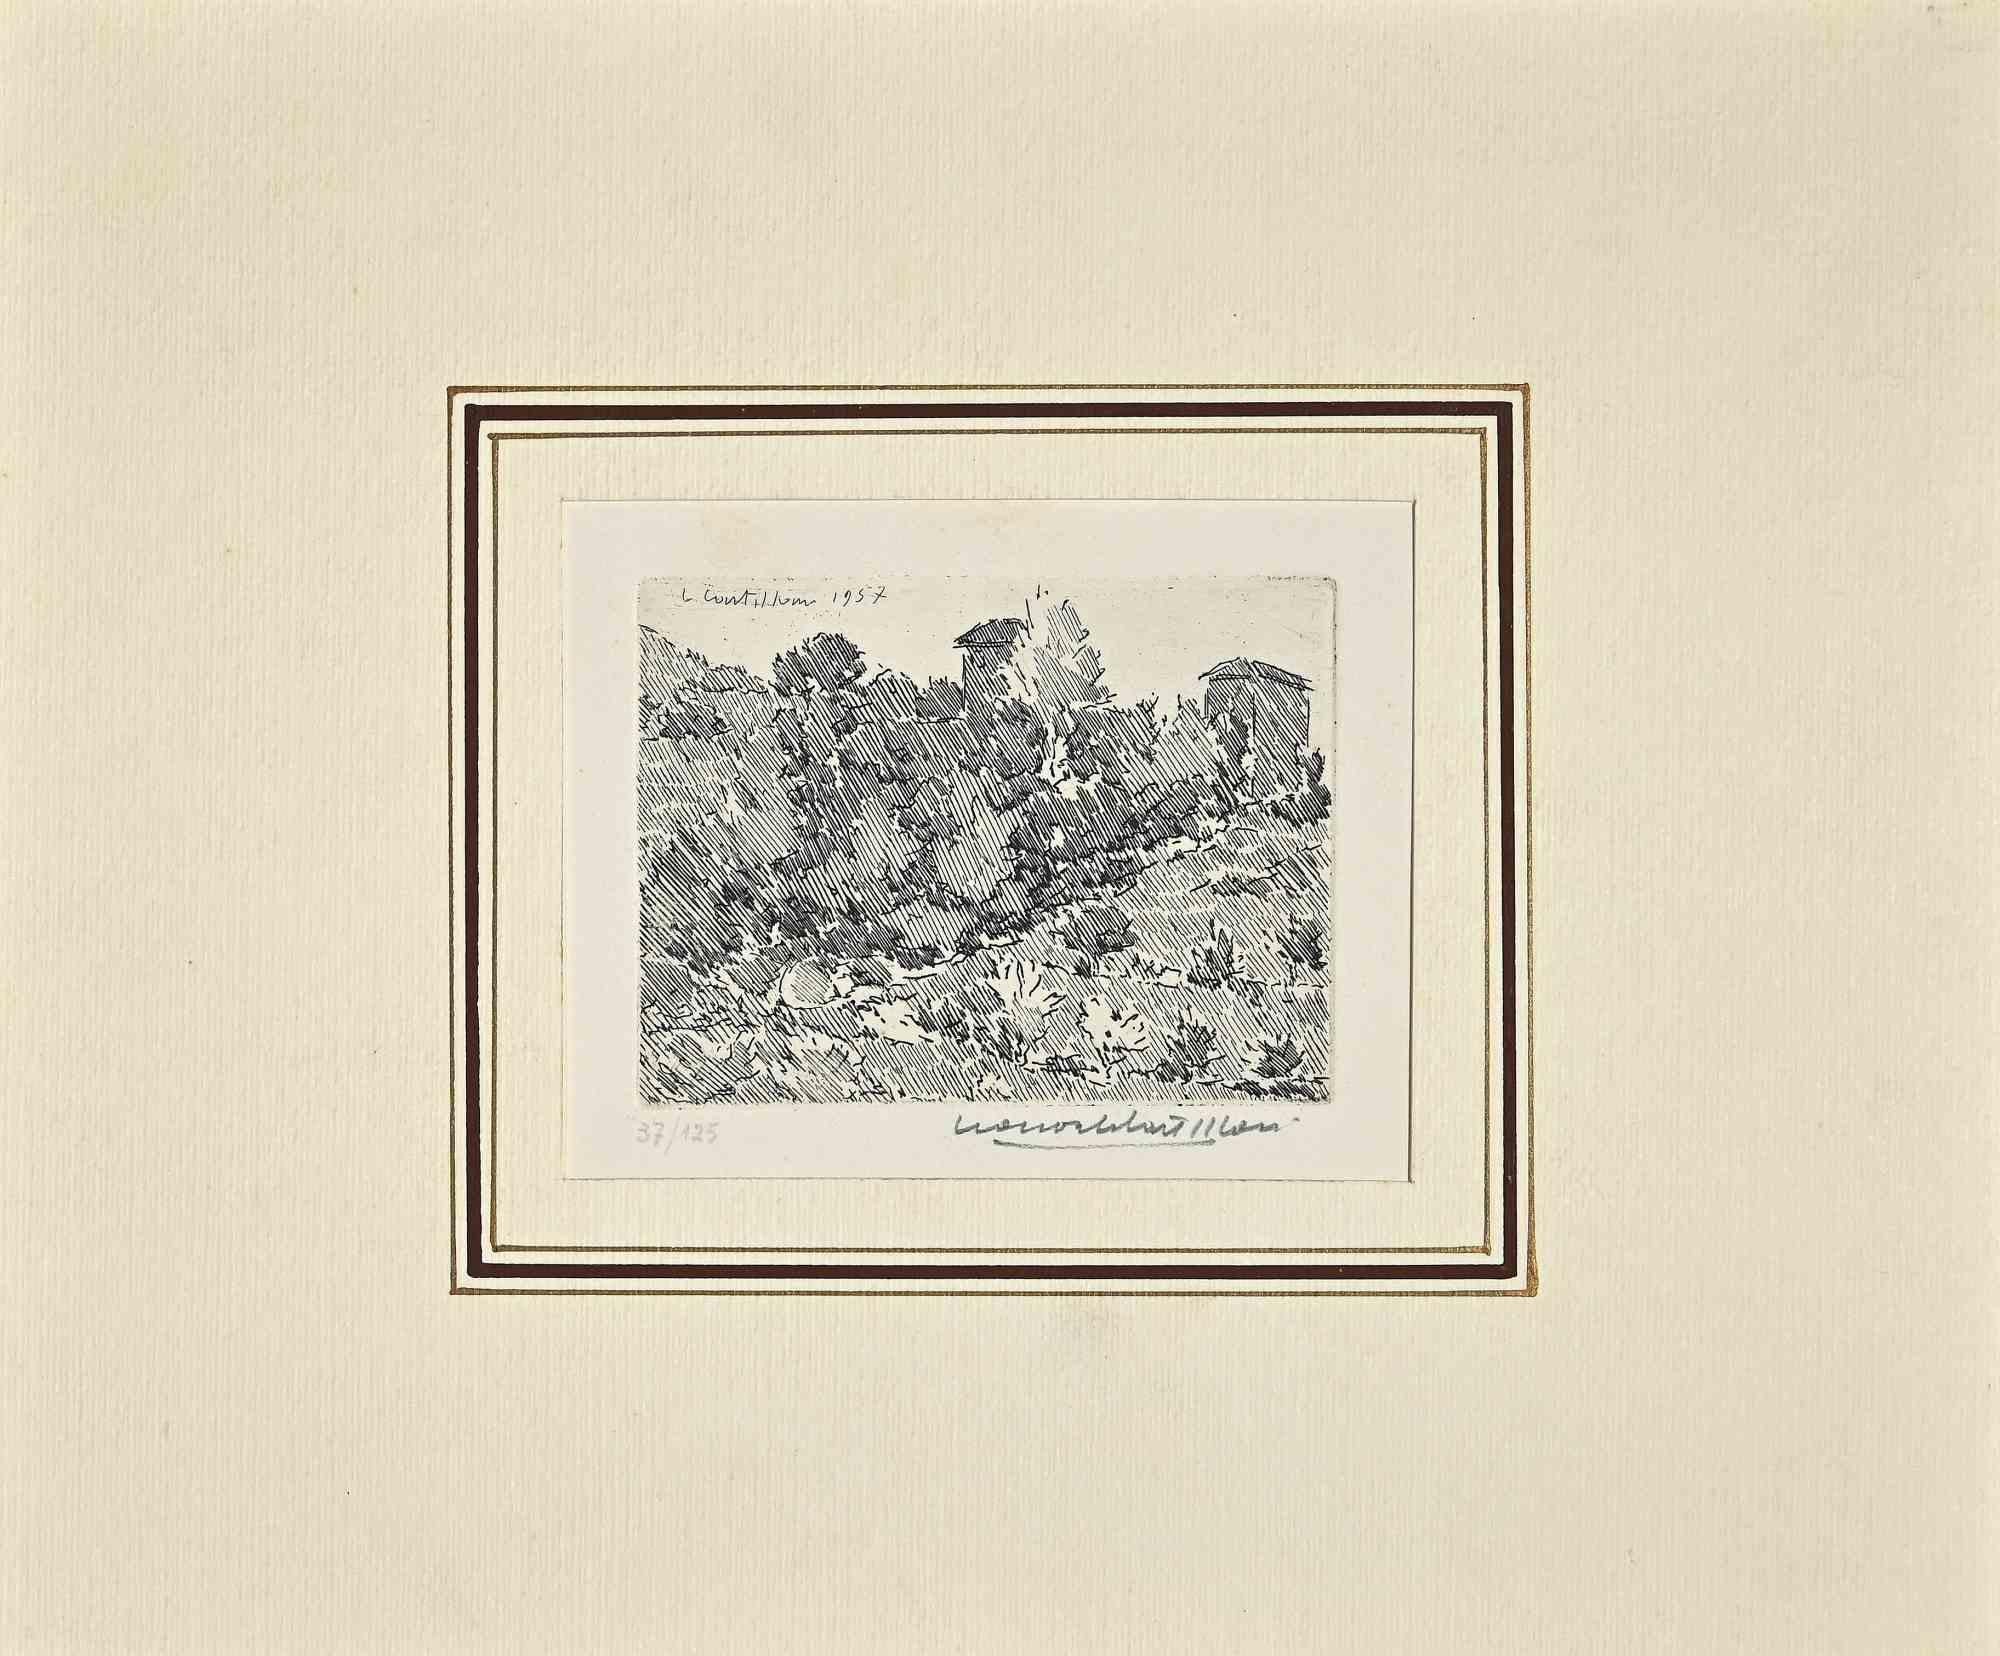 Bushes is an etching realized by Leonardo Castellani in 1957.

The etching is part of an edition of 125 specimens, numbered.

Hand-signed by the artist on the lower right corner.

Leonardo Castellani  was an artist and writer from the Marches who